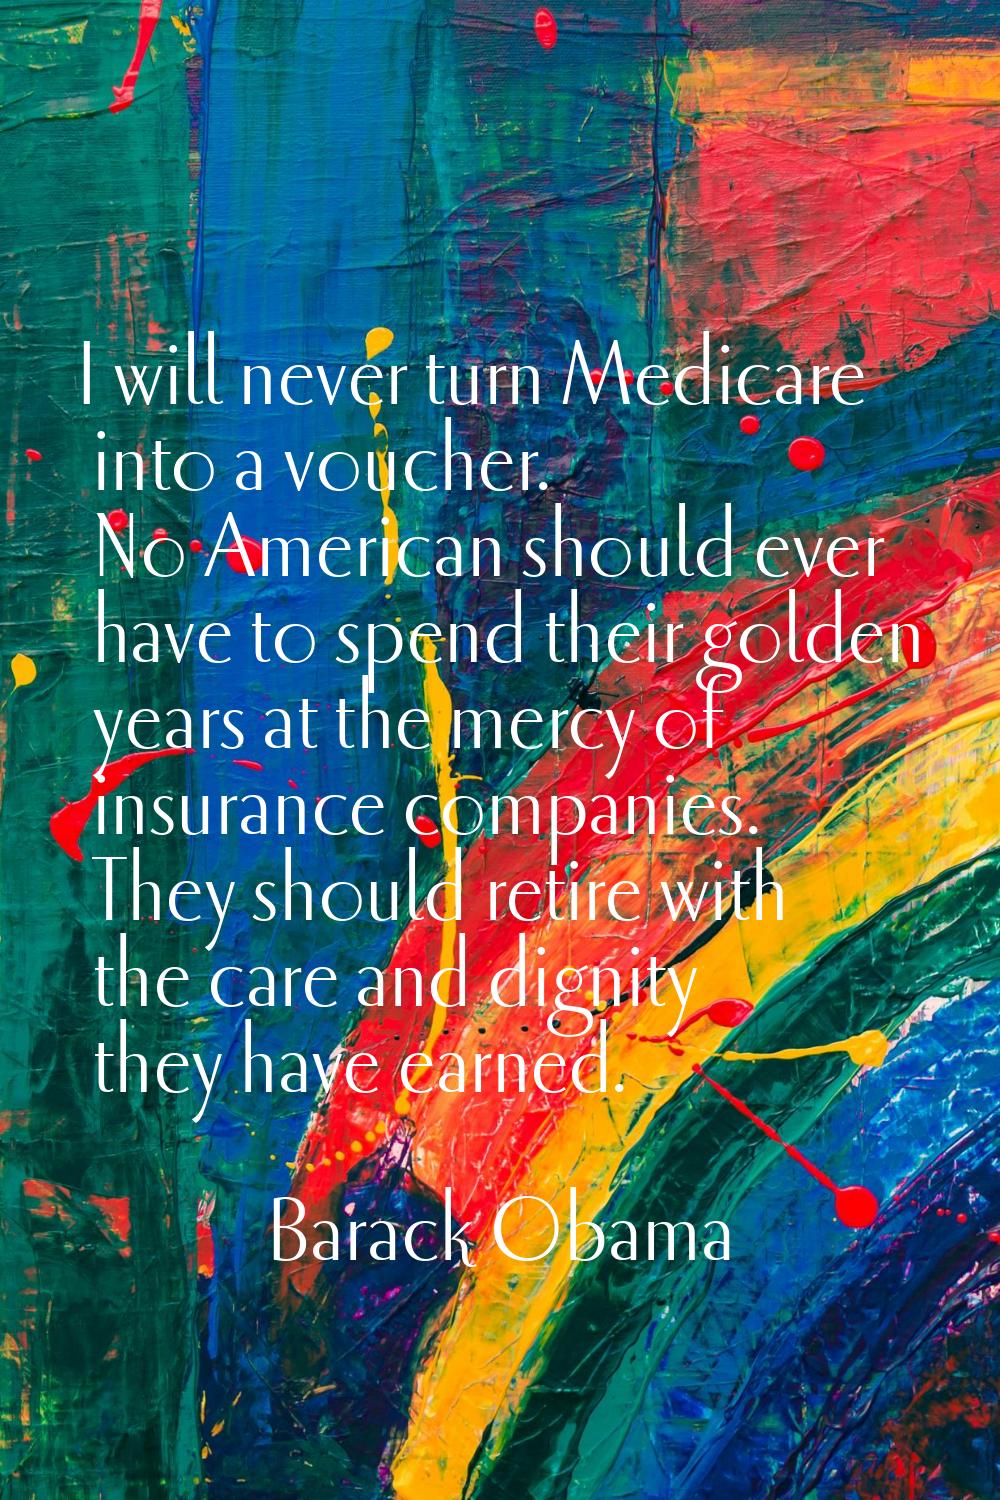 I will never turn Medicare into a voucher. No American should ever have to spend their golden years